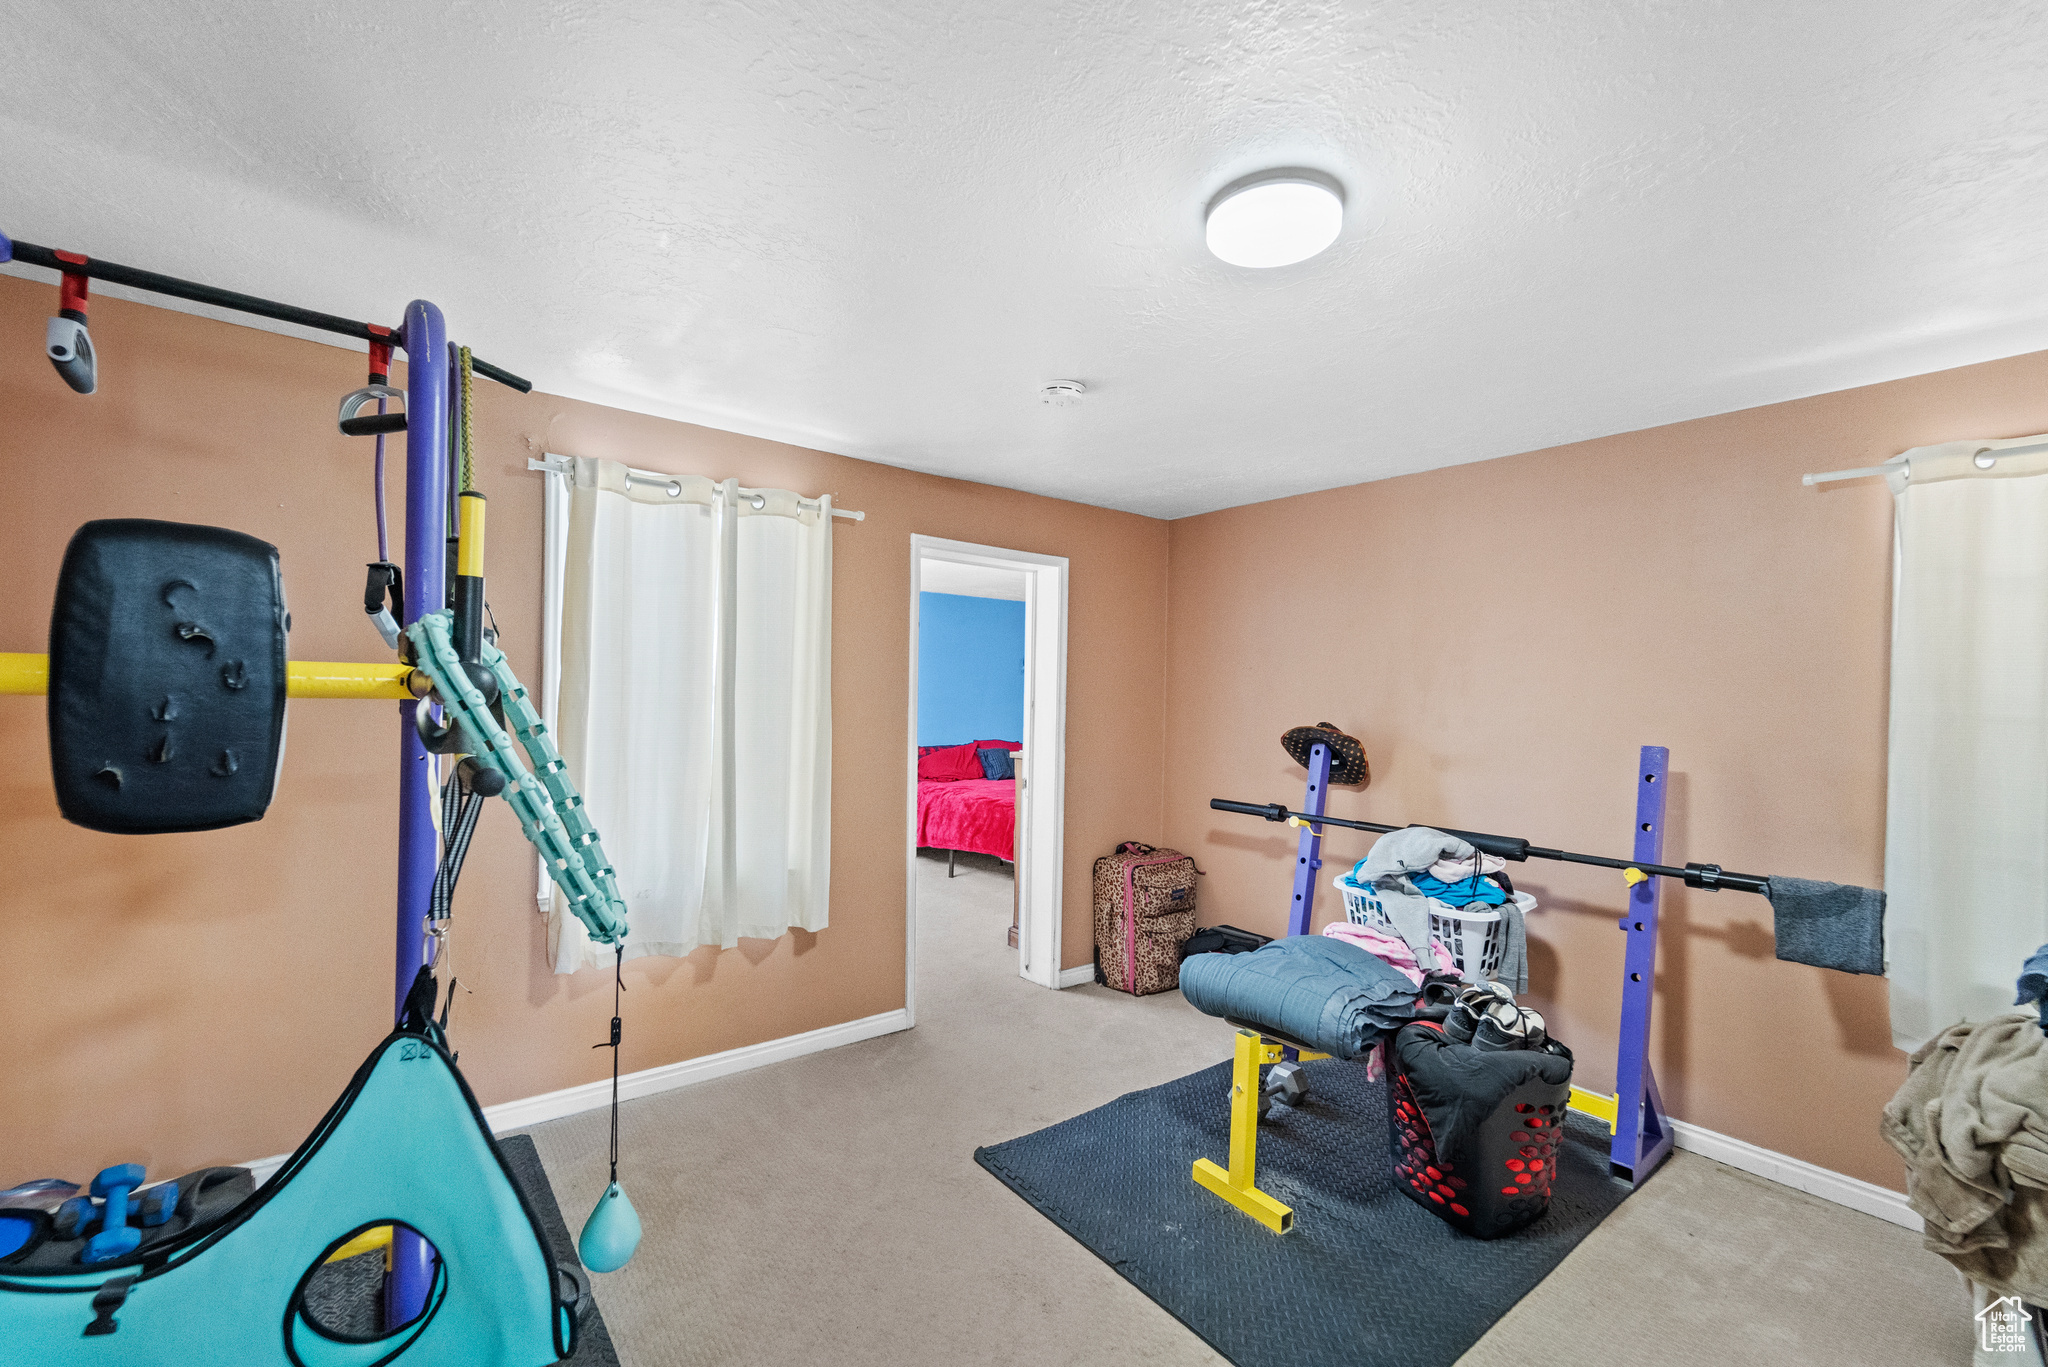 Exercise room with carpet flooring and a textured ceiling